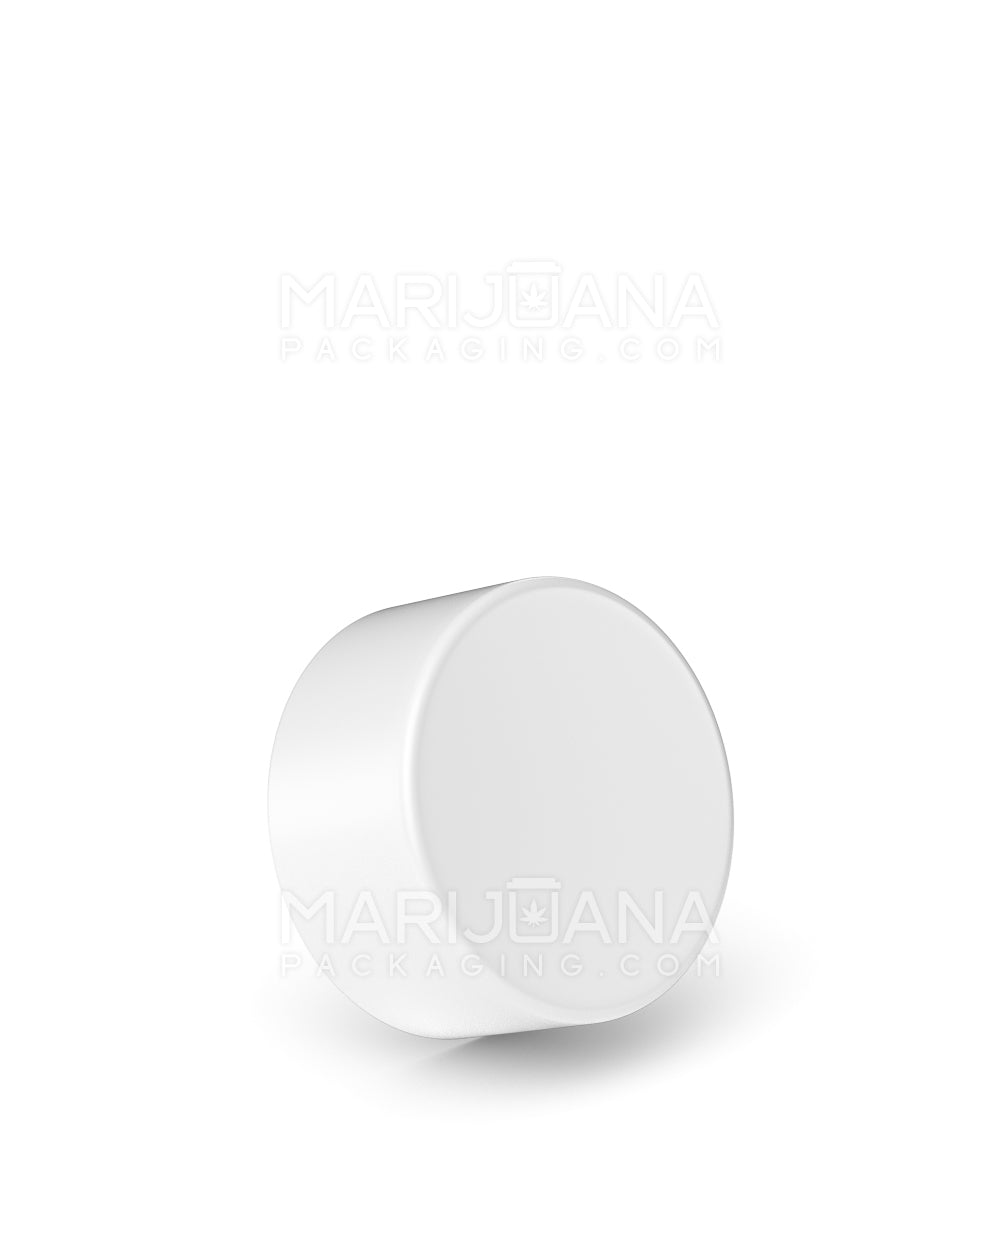 Child Resistant | Smooth Push Down & Turn Plastic Caps w/ Foil Liner | 28mm - Matte White - 504 Count - 1